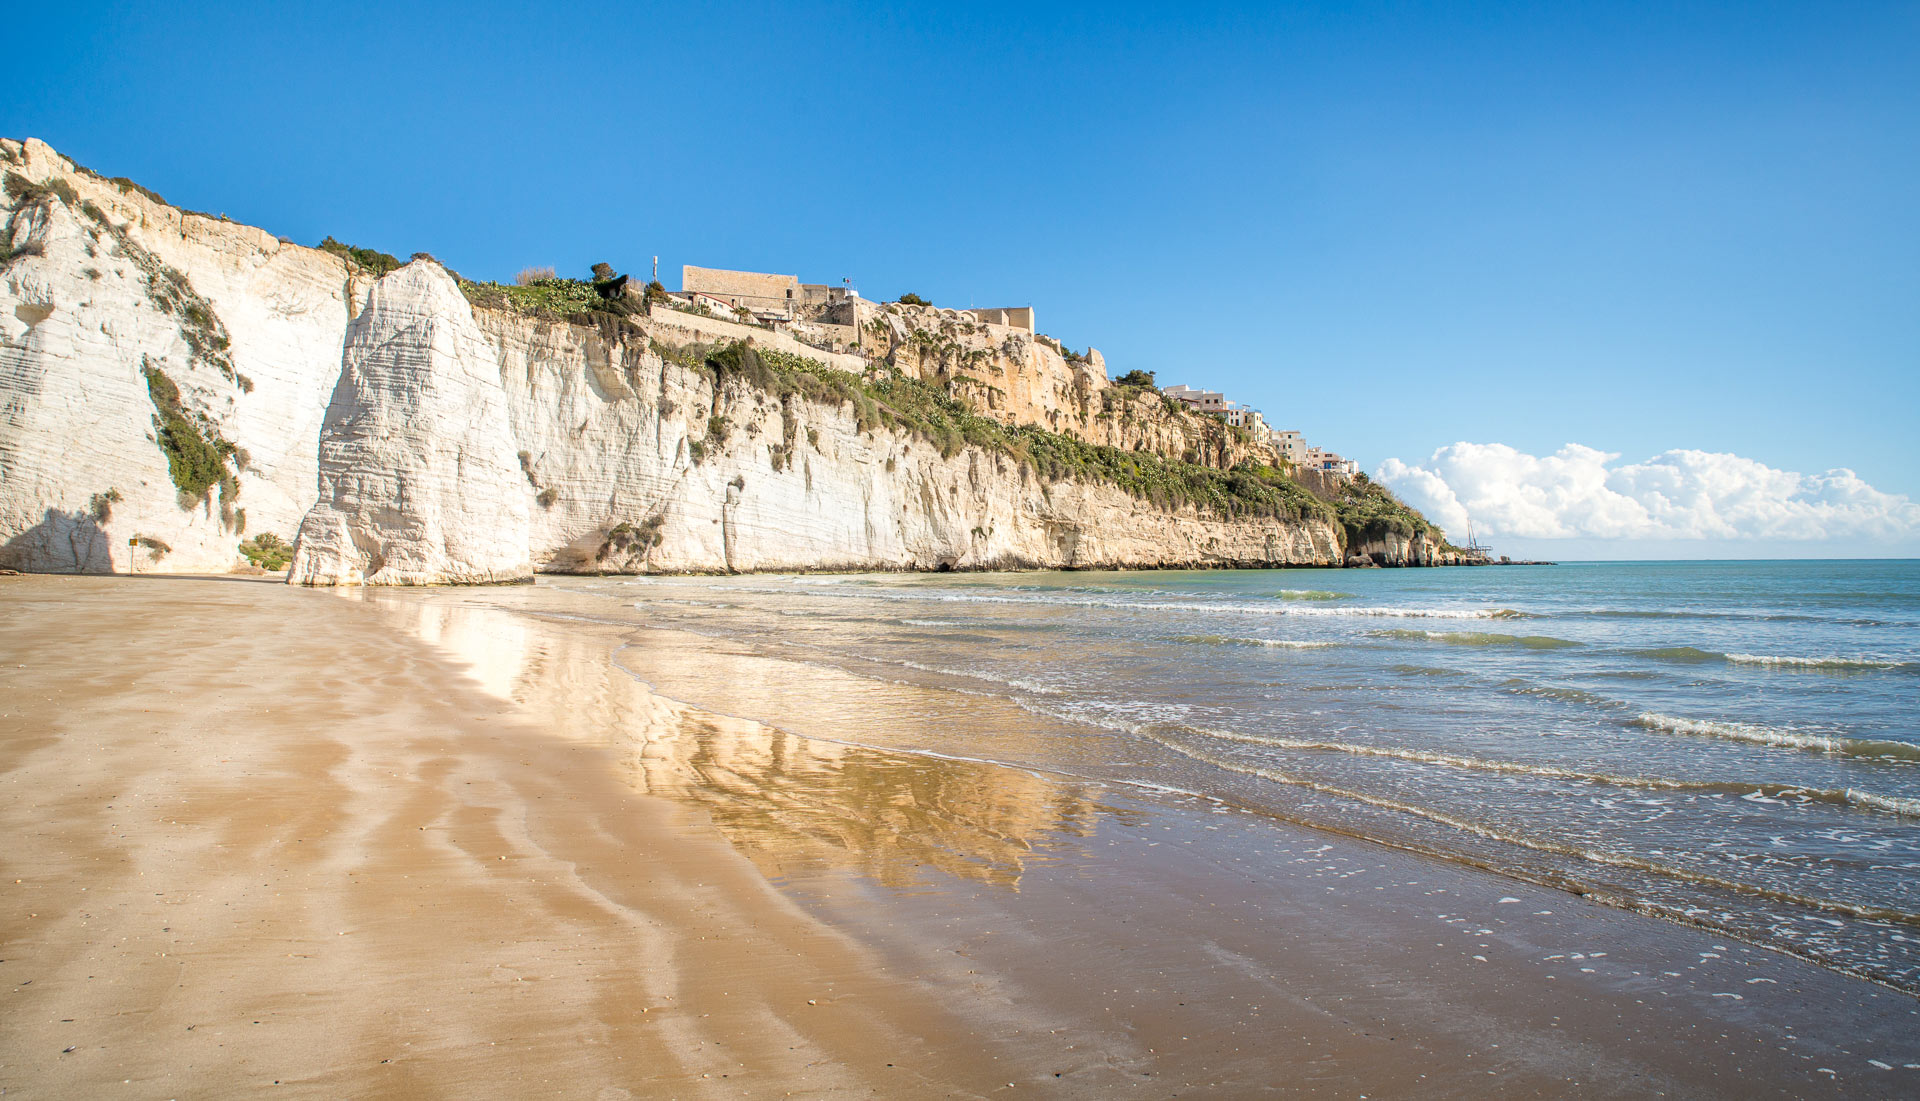 The beach of Vieste and the Pizzomunno - 10 days in Puglia Itinerary